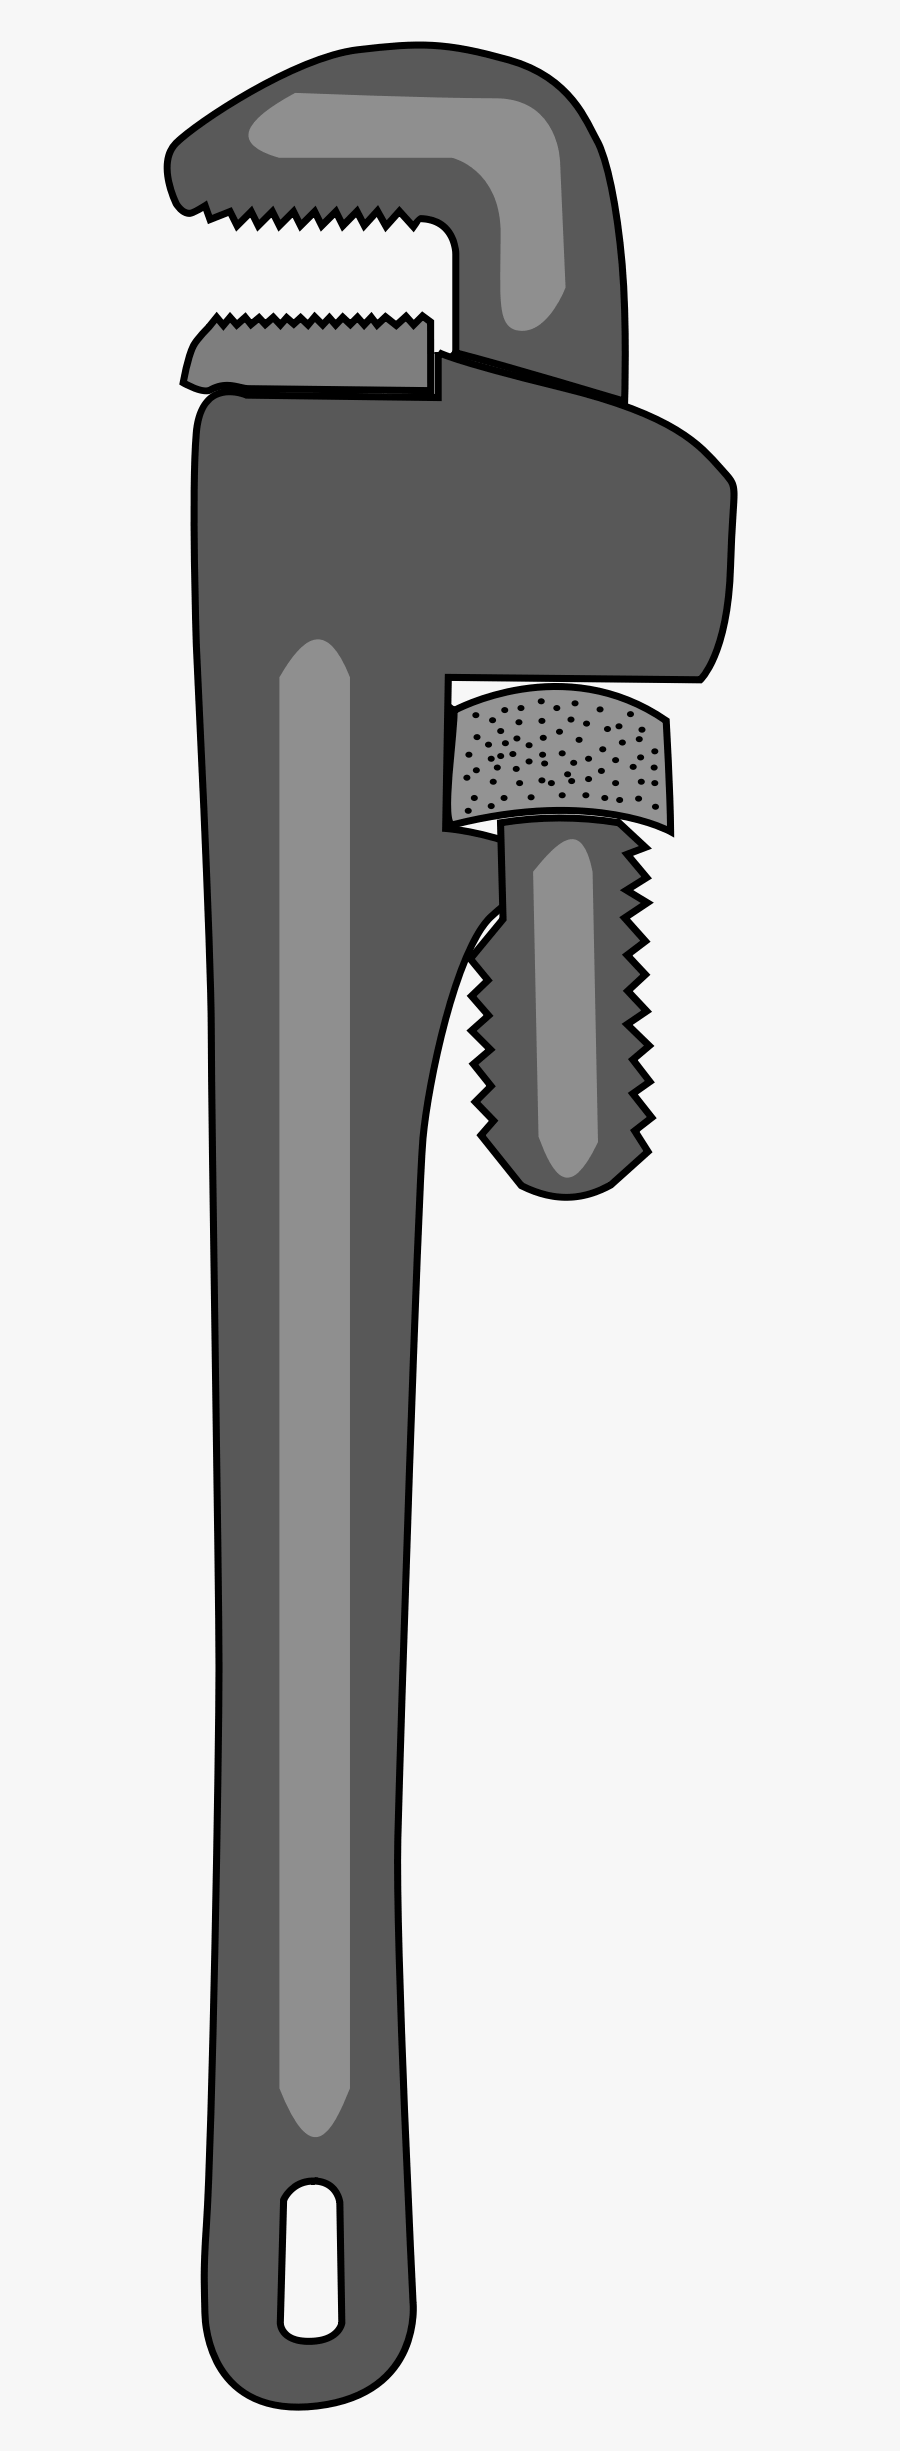 Transparent Wrench - Monkey Wrench Clipart, Transparent Clipart